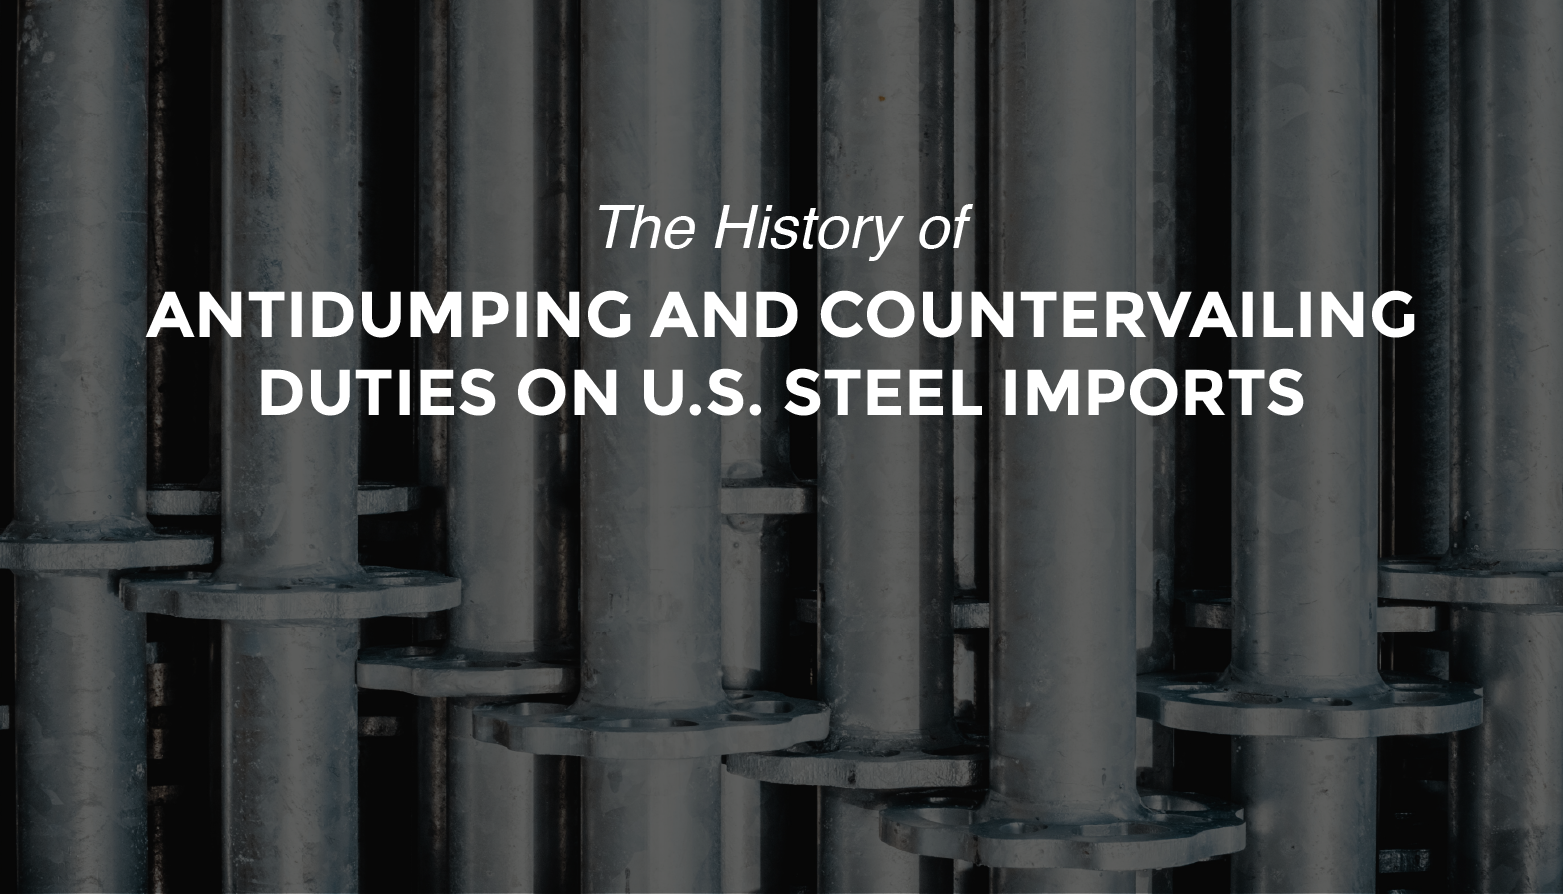 Trade Risk Guaranty outlines the history of antidumping and countervailing duties on steel imported into the U.S.